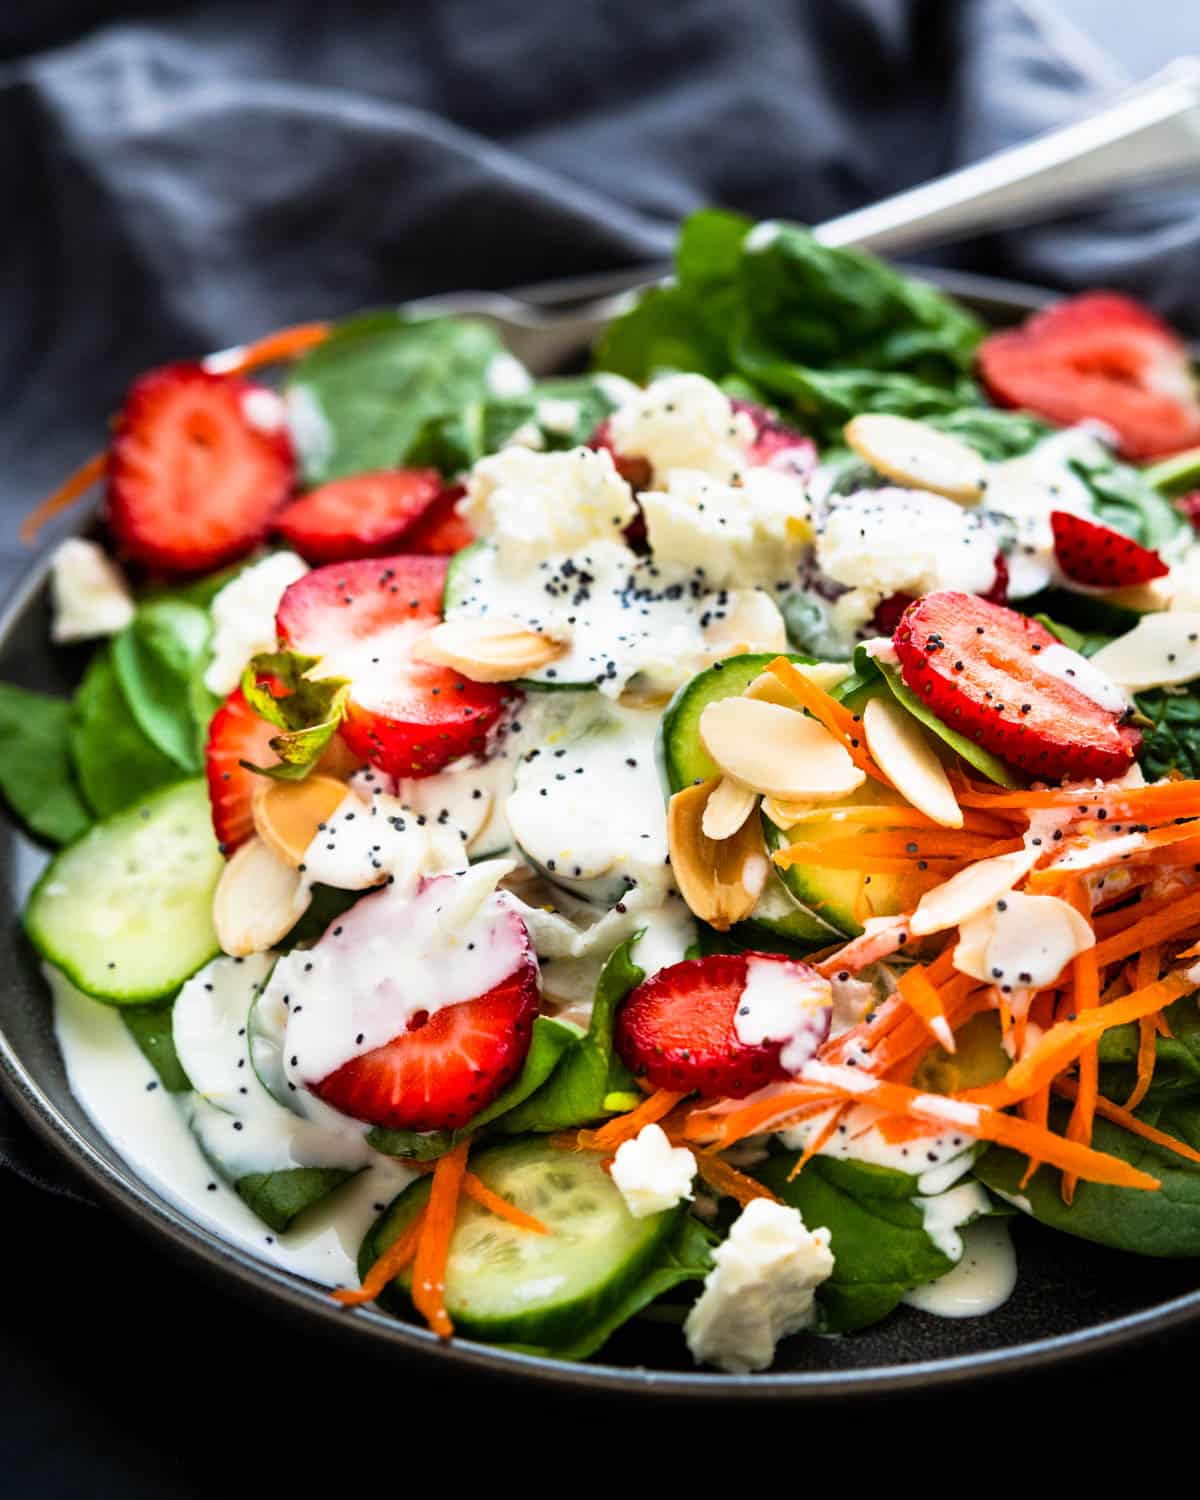 A serving of strawberry spinach salad with poppyseed dressing.